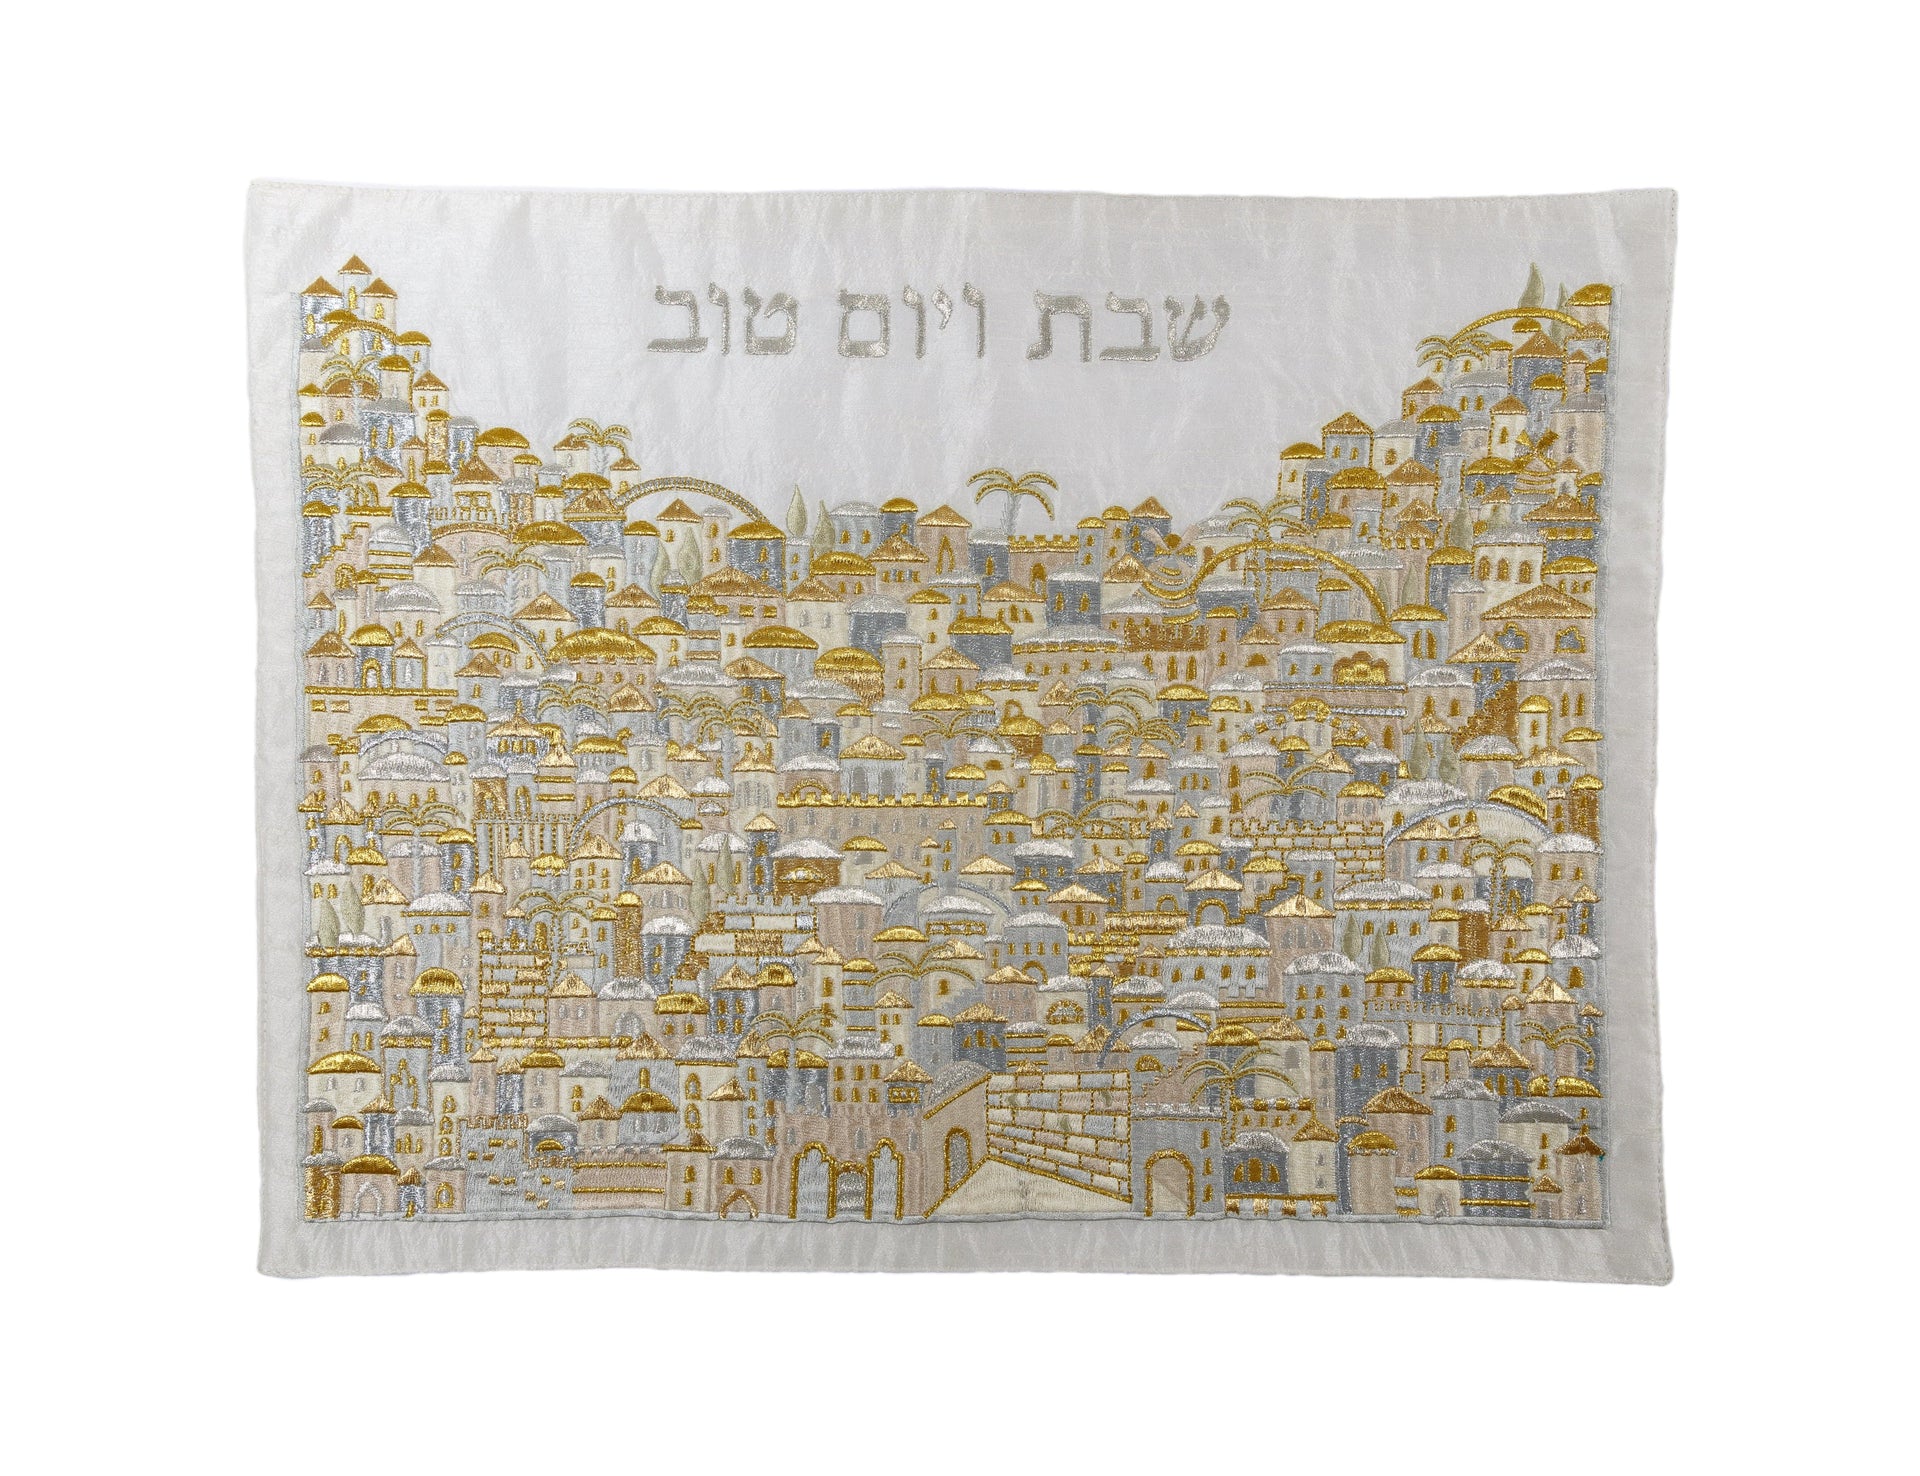 Yair Emanuel Challah Accessory Default Jerusalem Embroidered Challah Cover by Yair Emanuel - Gold + Silver